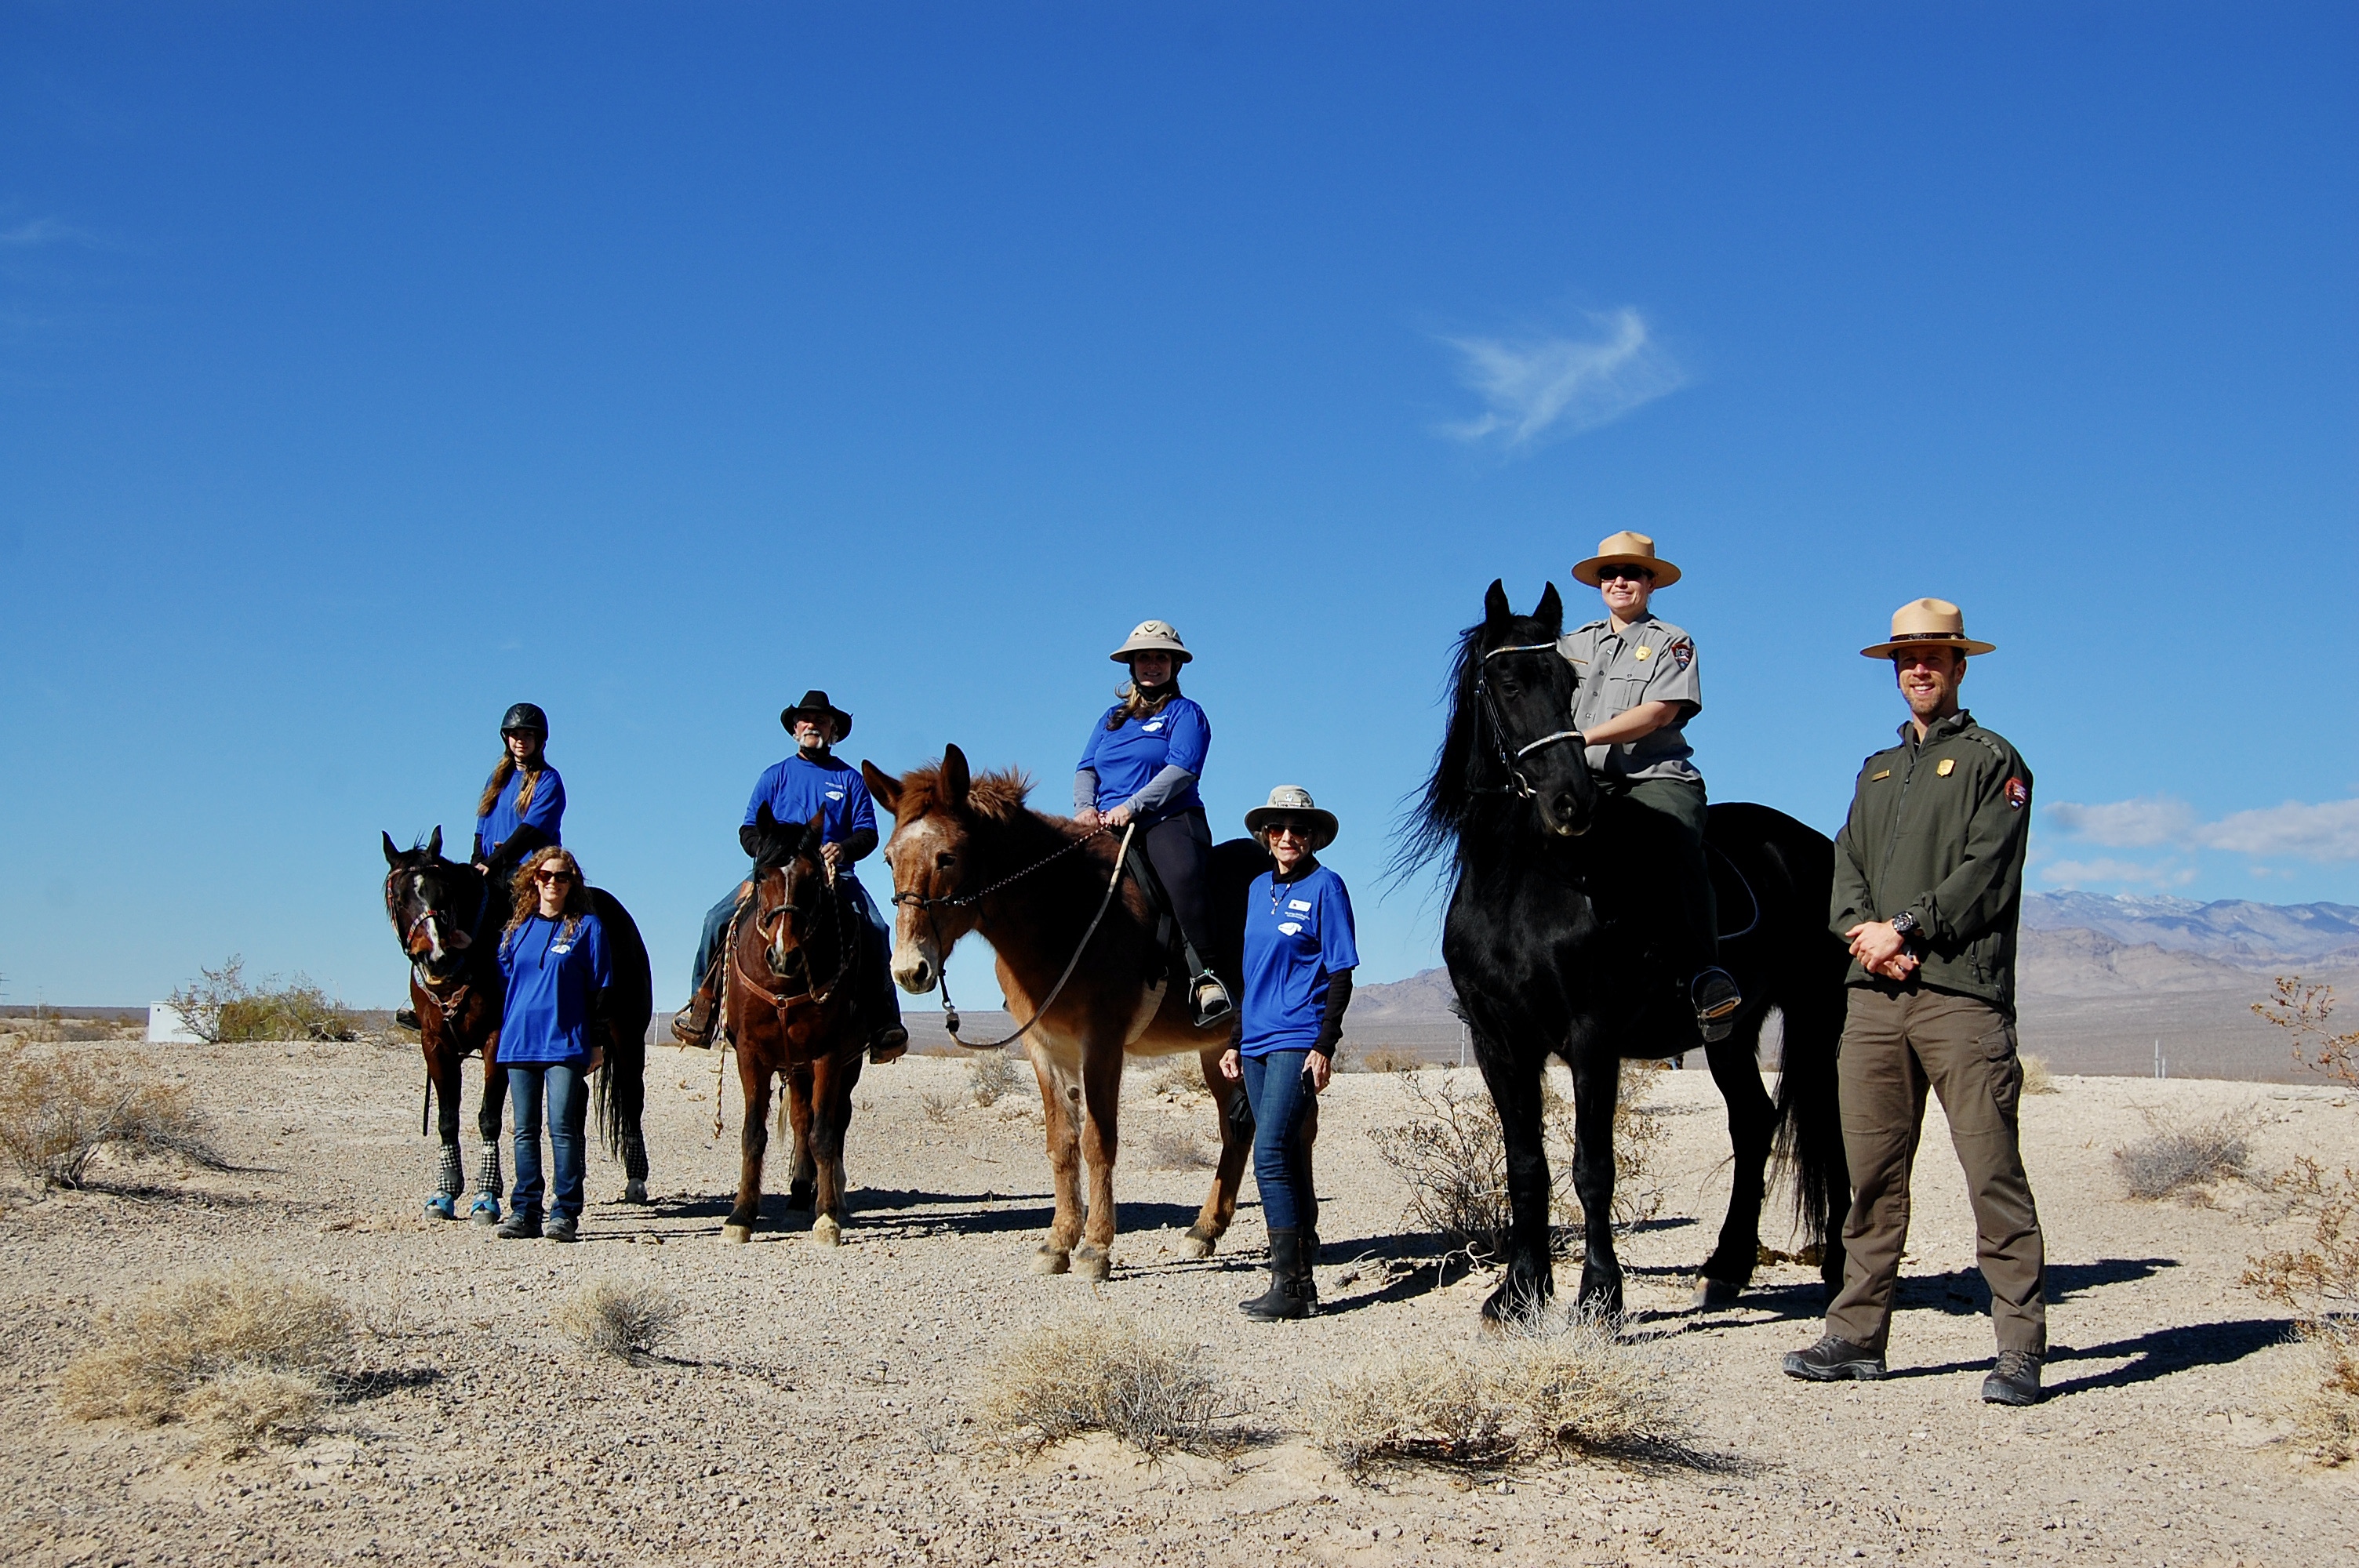 Tule Springs Fossil Beds National Monument Volunteer Mounted Horse Patrol on horseback with the Las Vegas Range in the background.